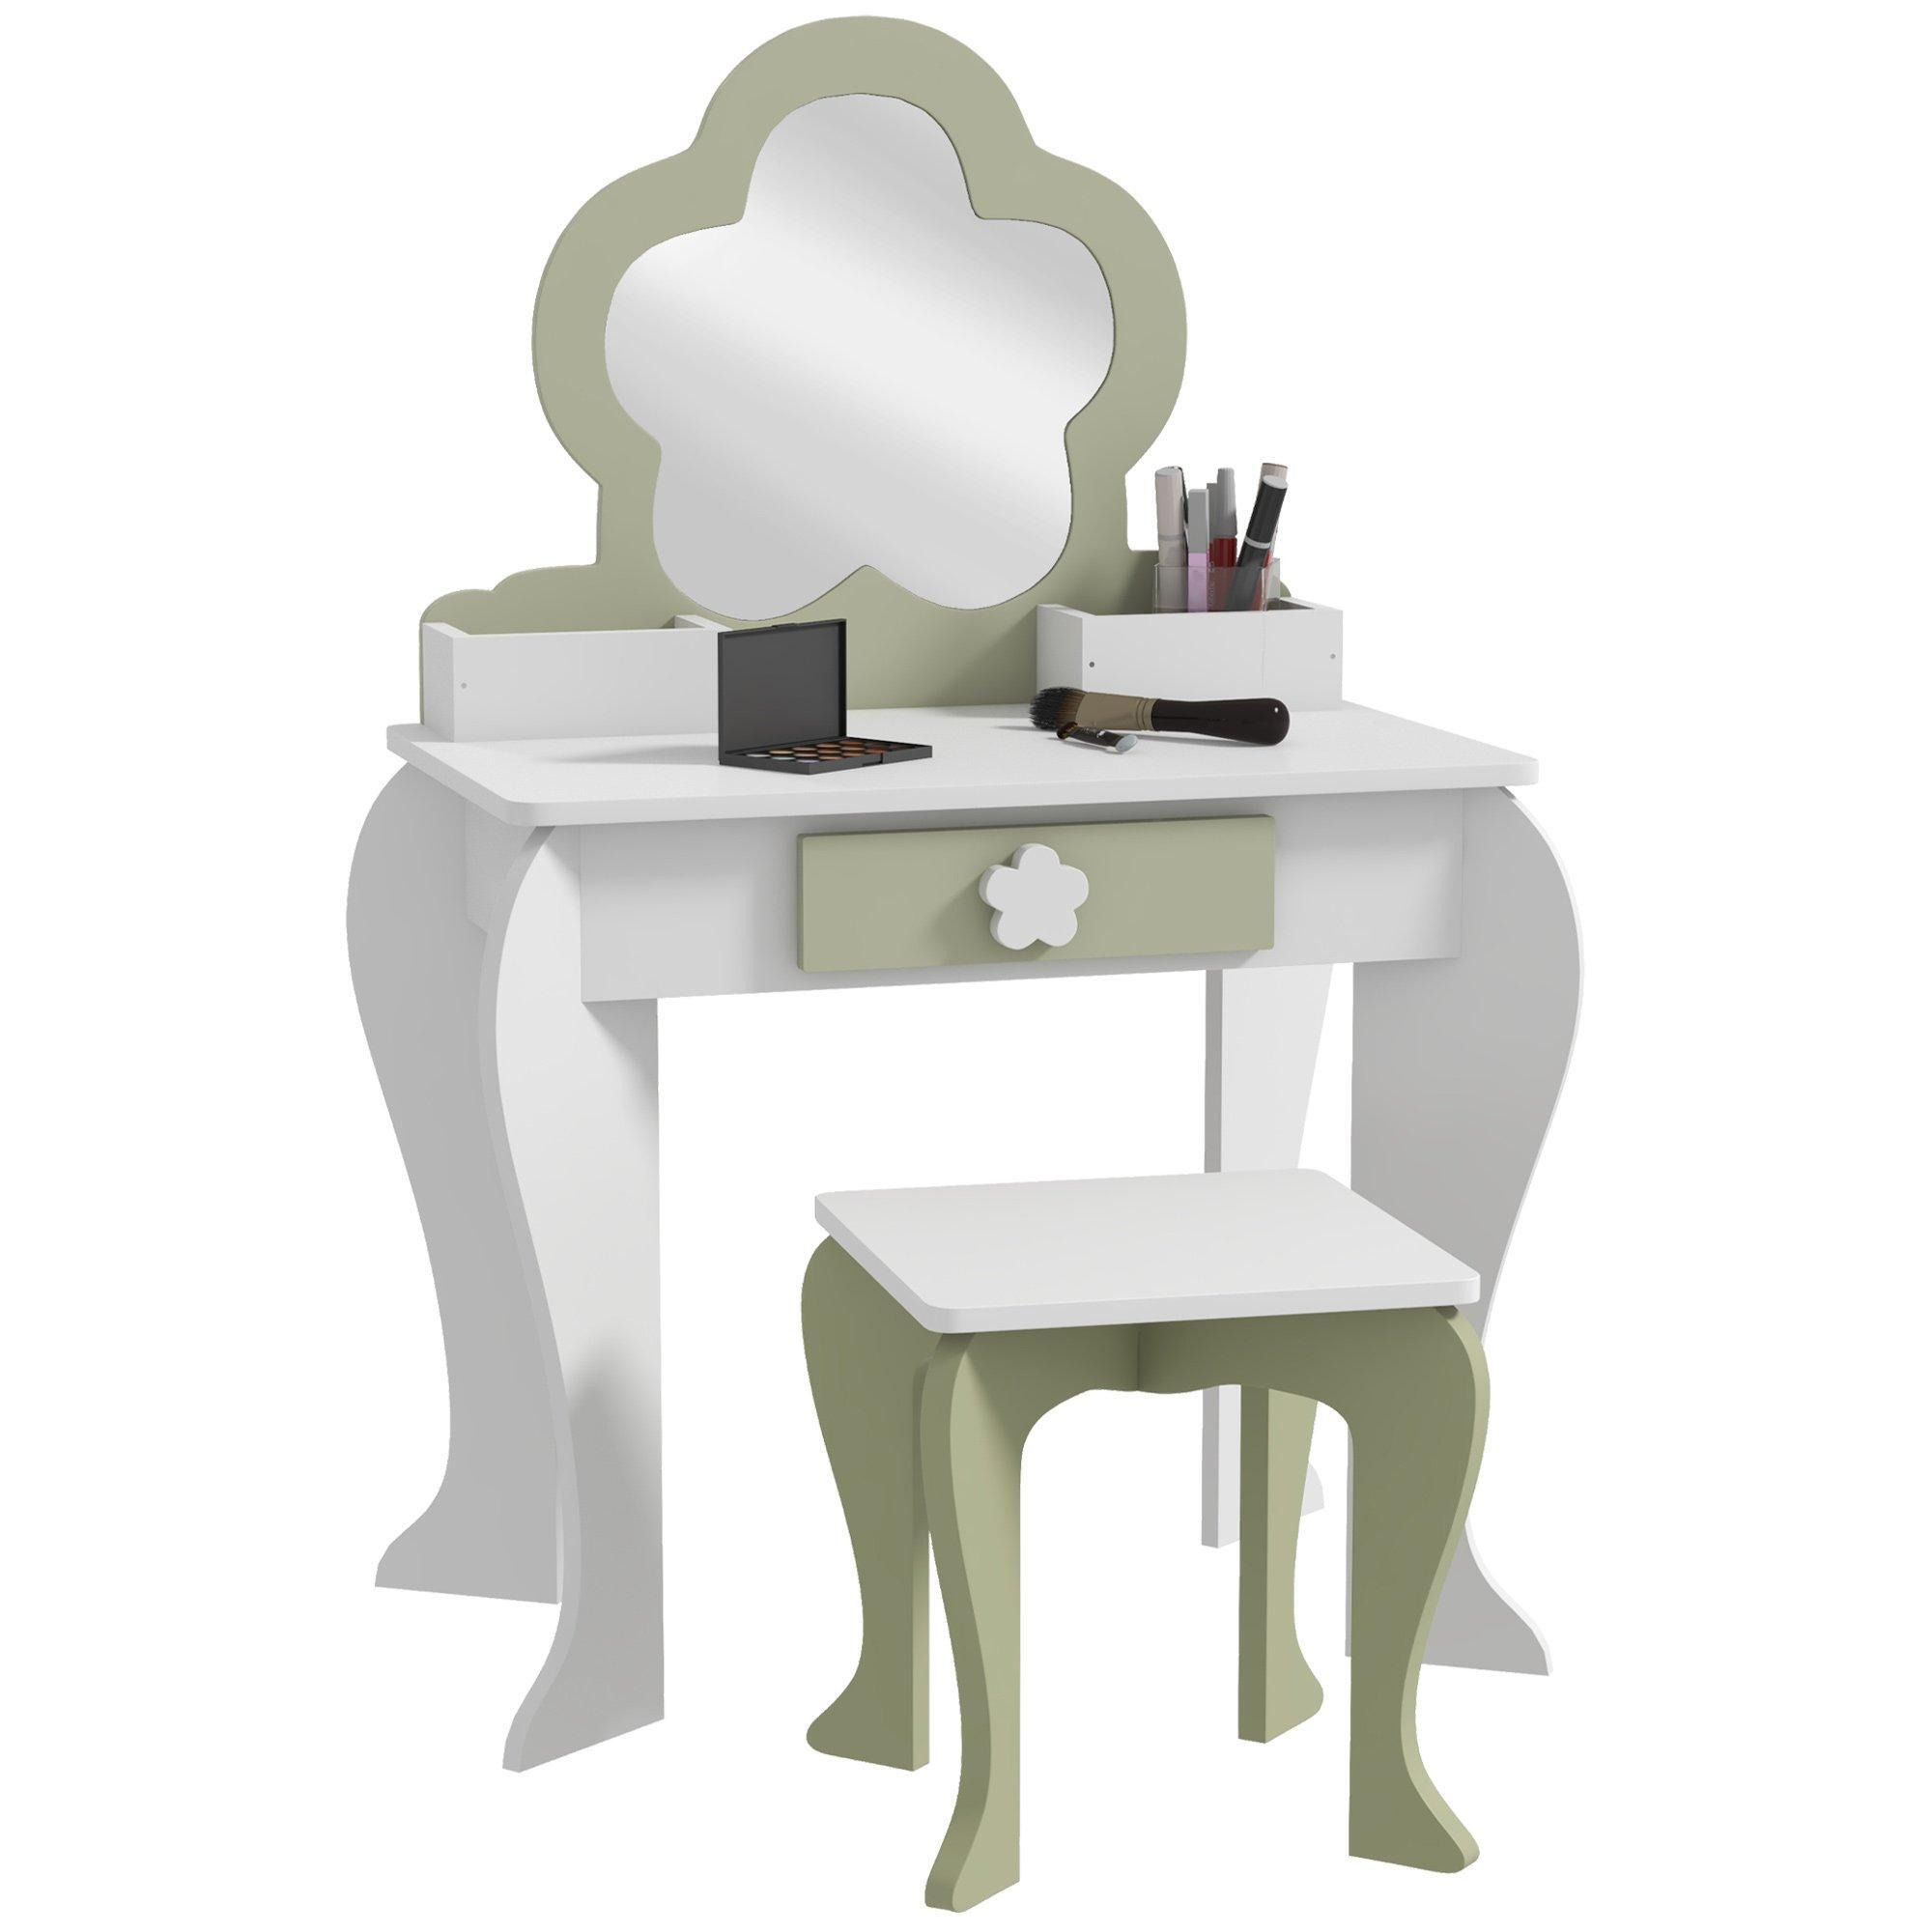 Kids Dressing Table with Mirror and Stool, Drawer, Storage Boxes - White - image 1